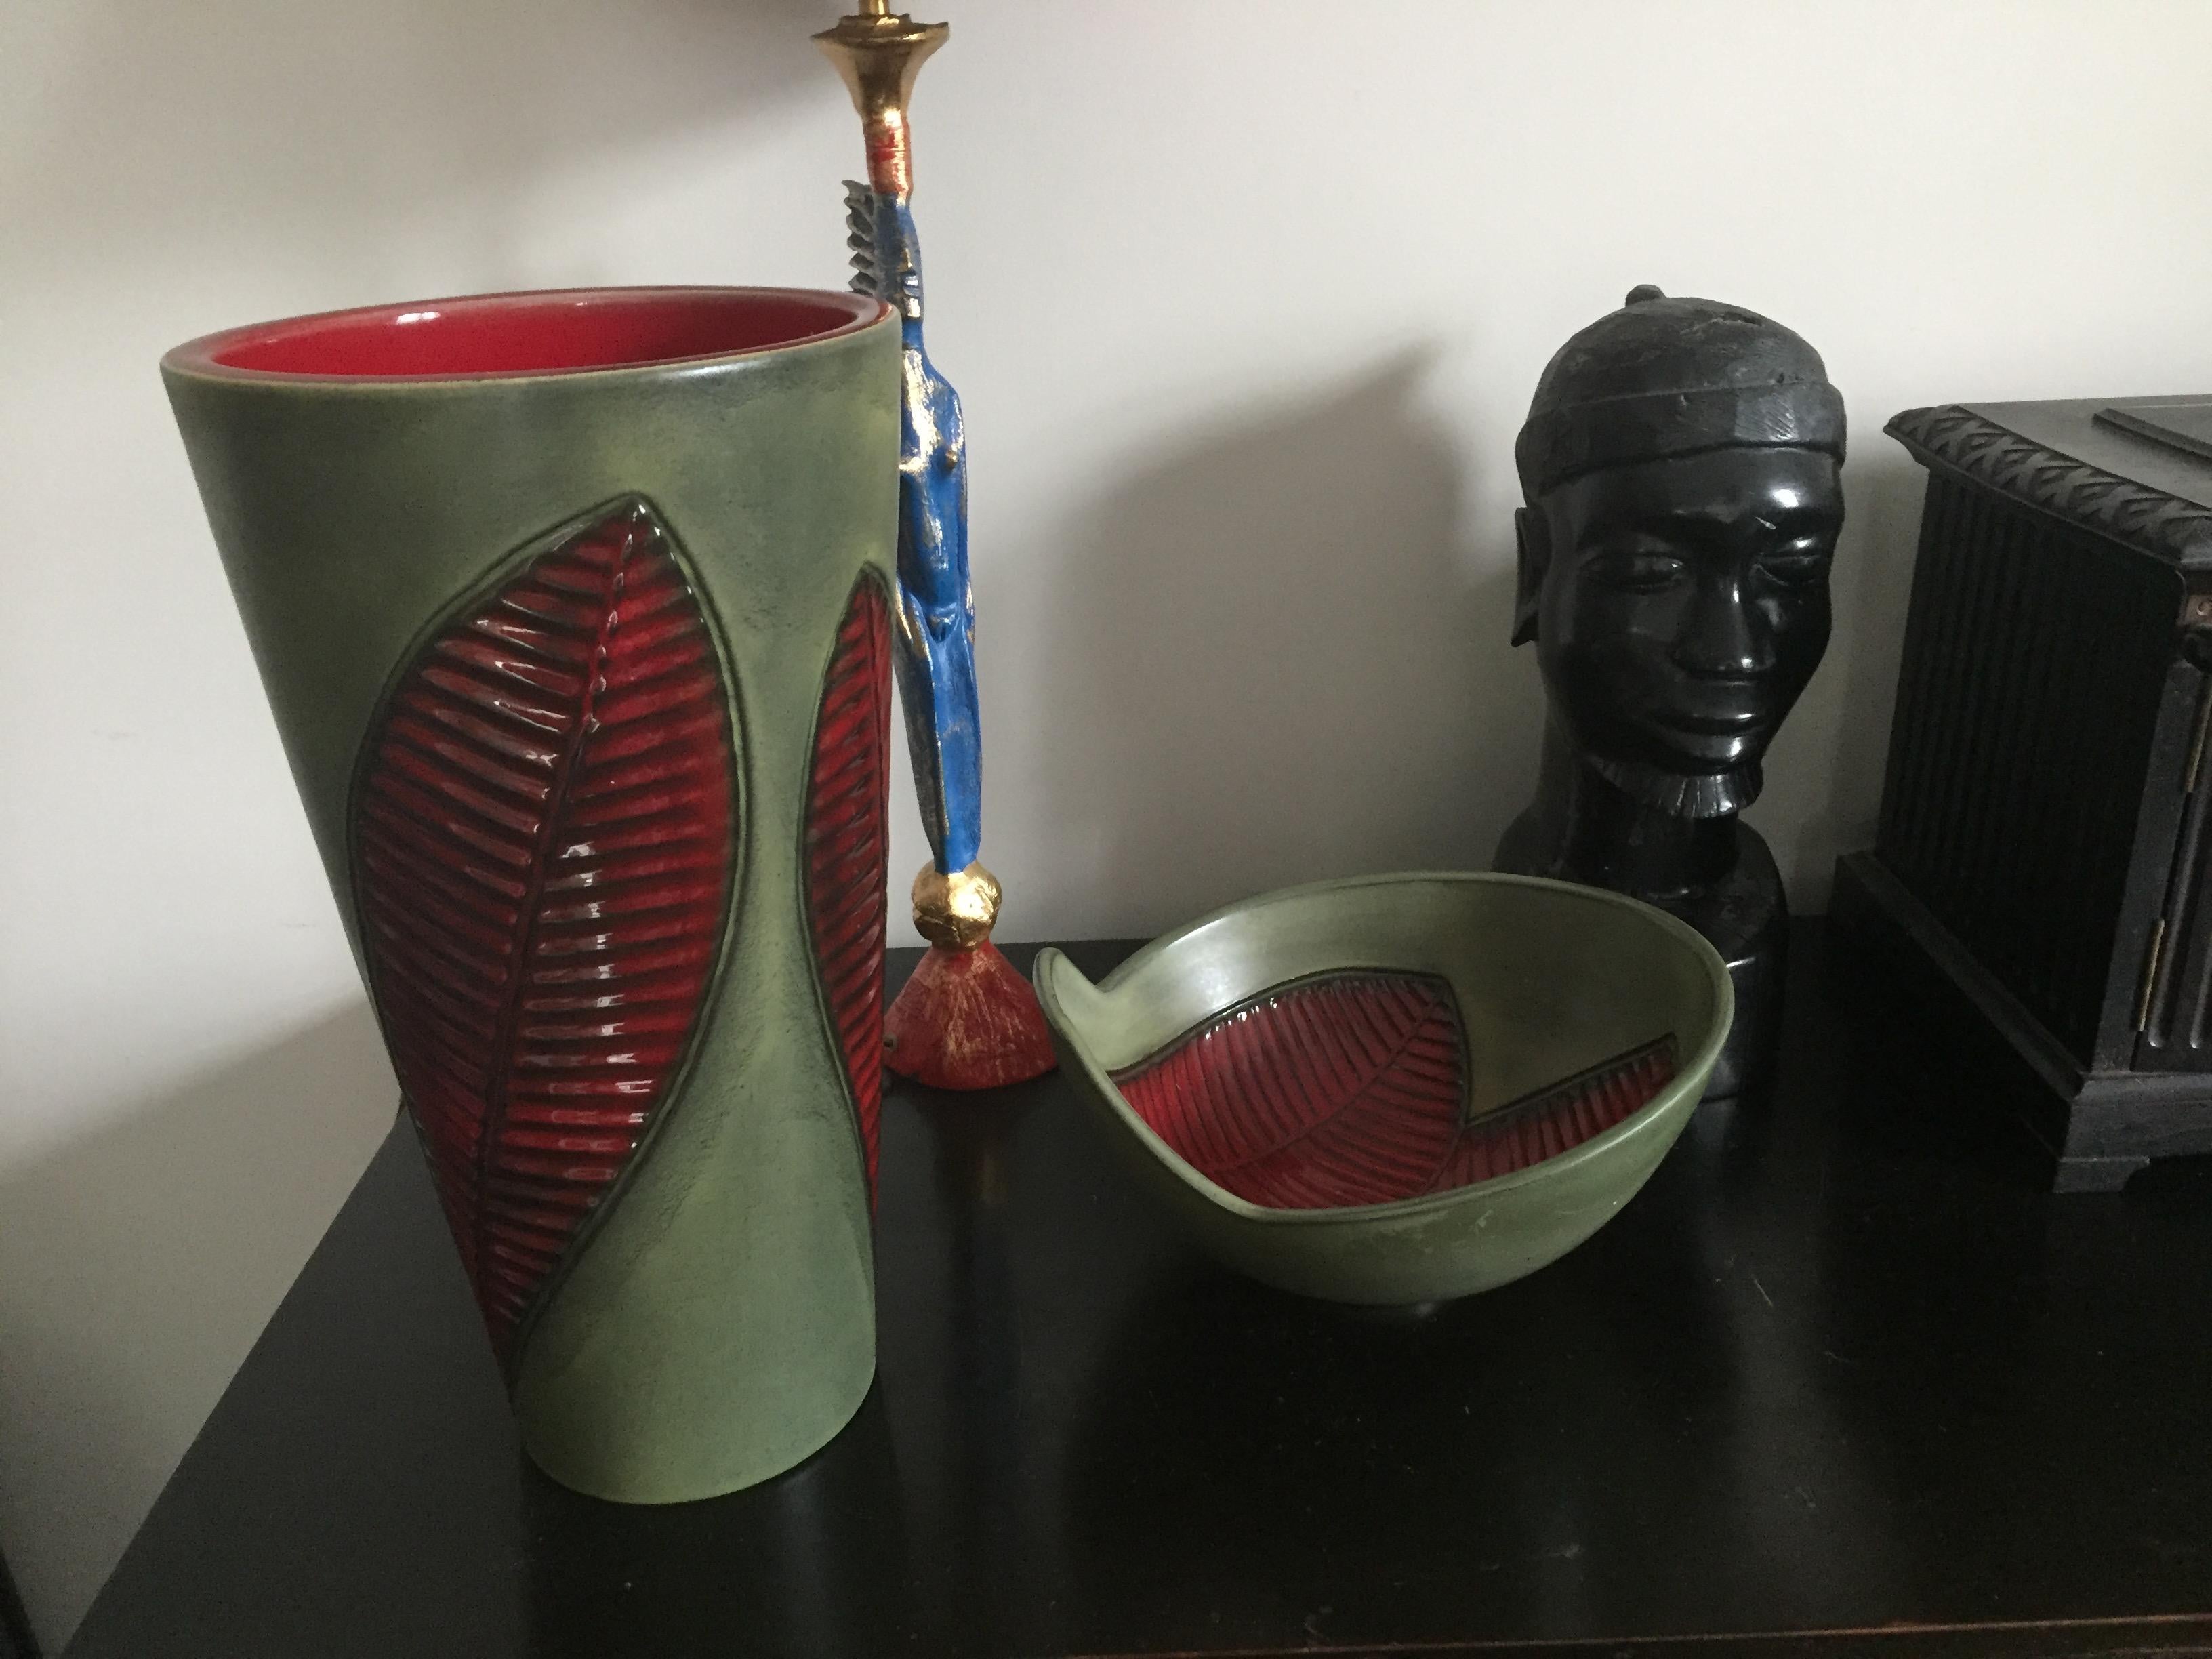 Large glazed ceramic exchanger vase with red lanceolate leaves on a green background.
Height 39 cm
Ceramic cup Elchinger Vallauris circa 1950
outside green inside red leaf.
Width 26 cm
Height 13 cm.